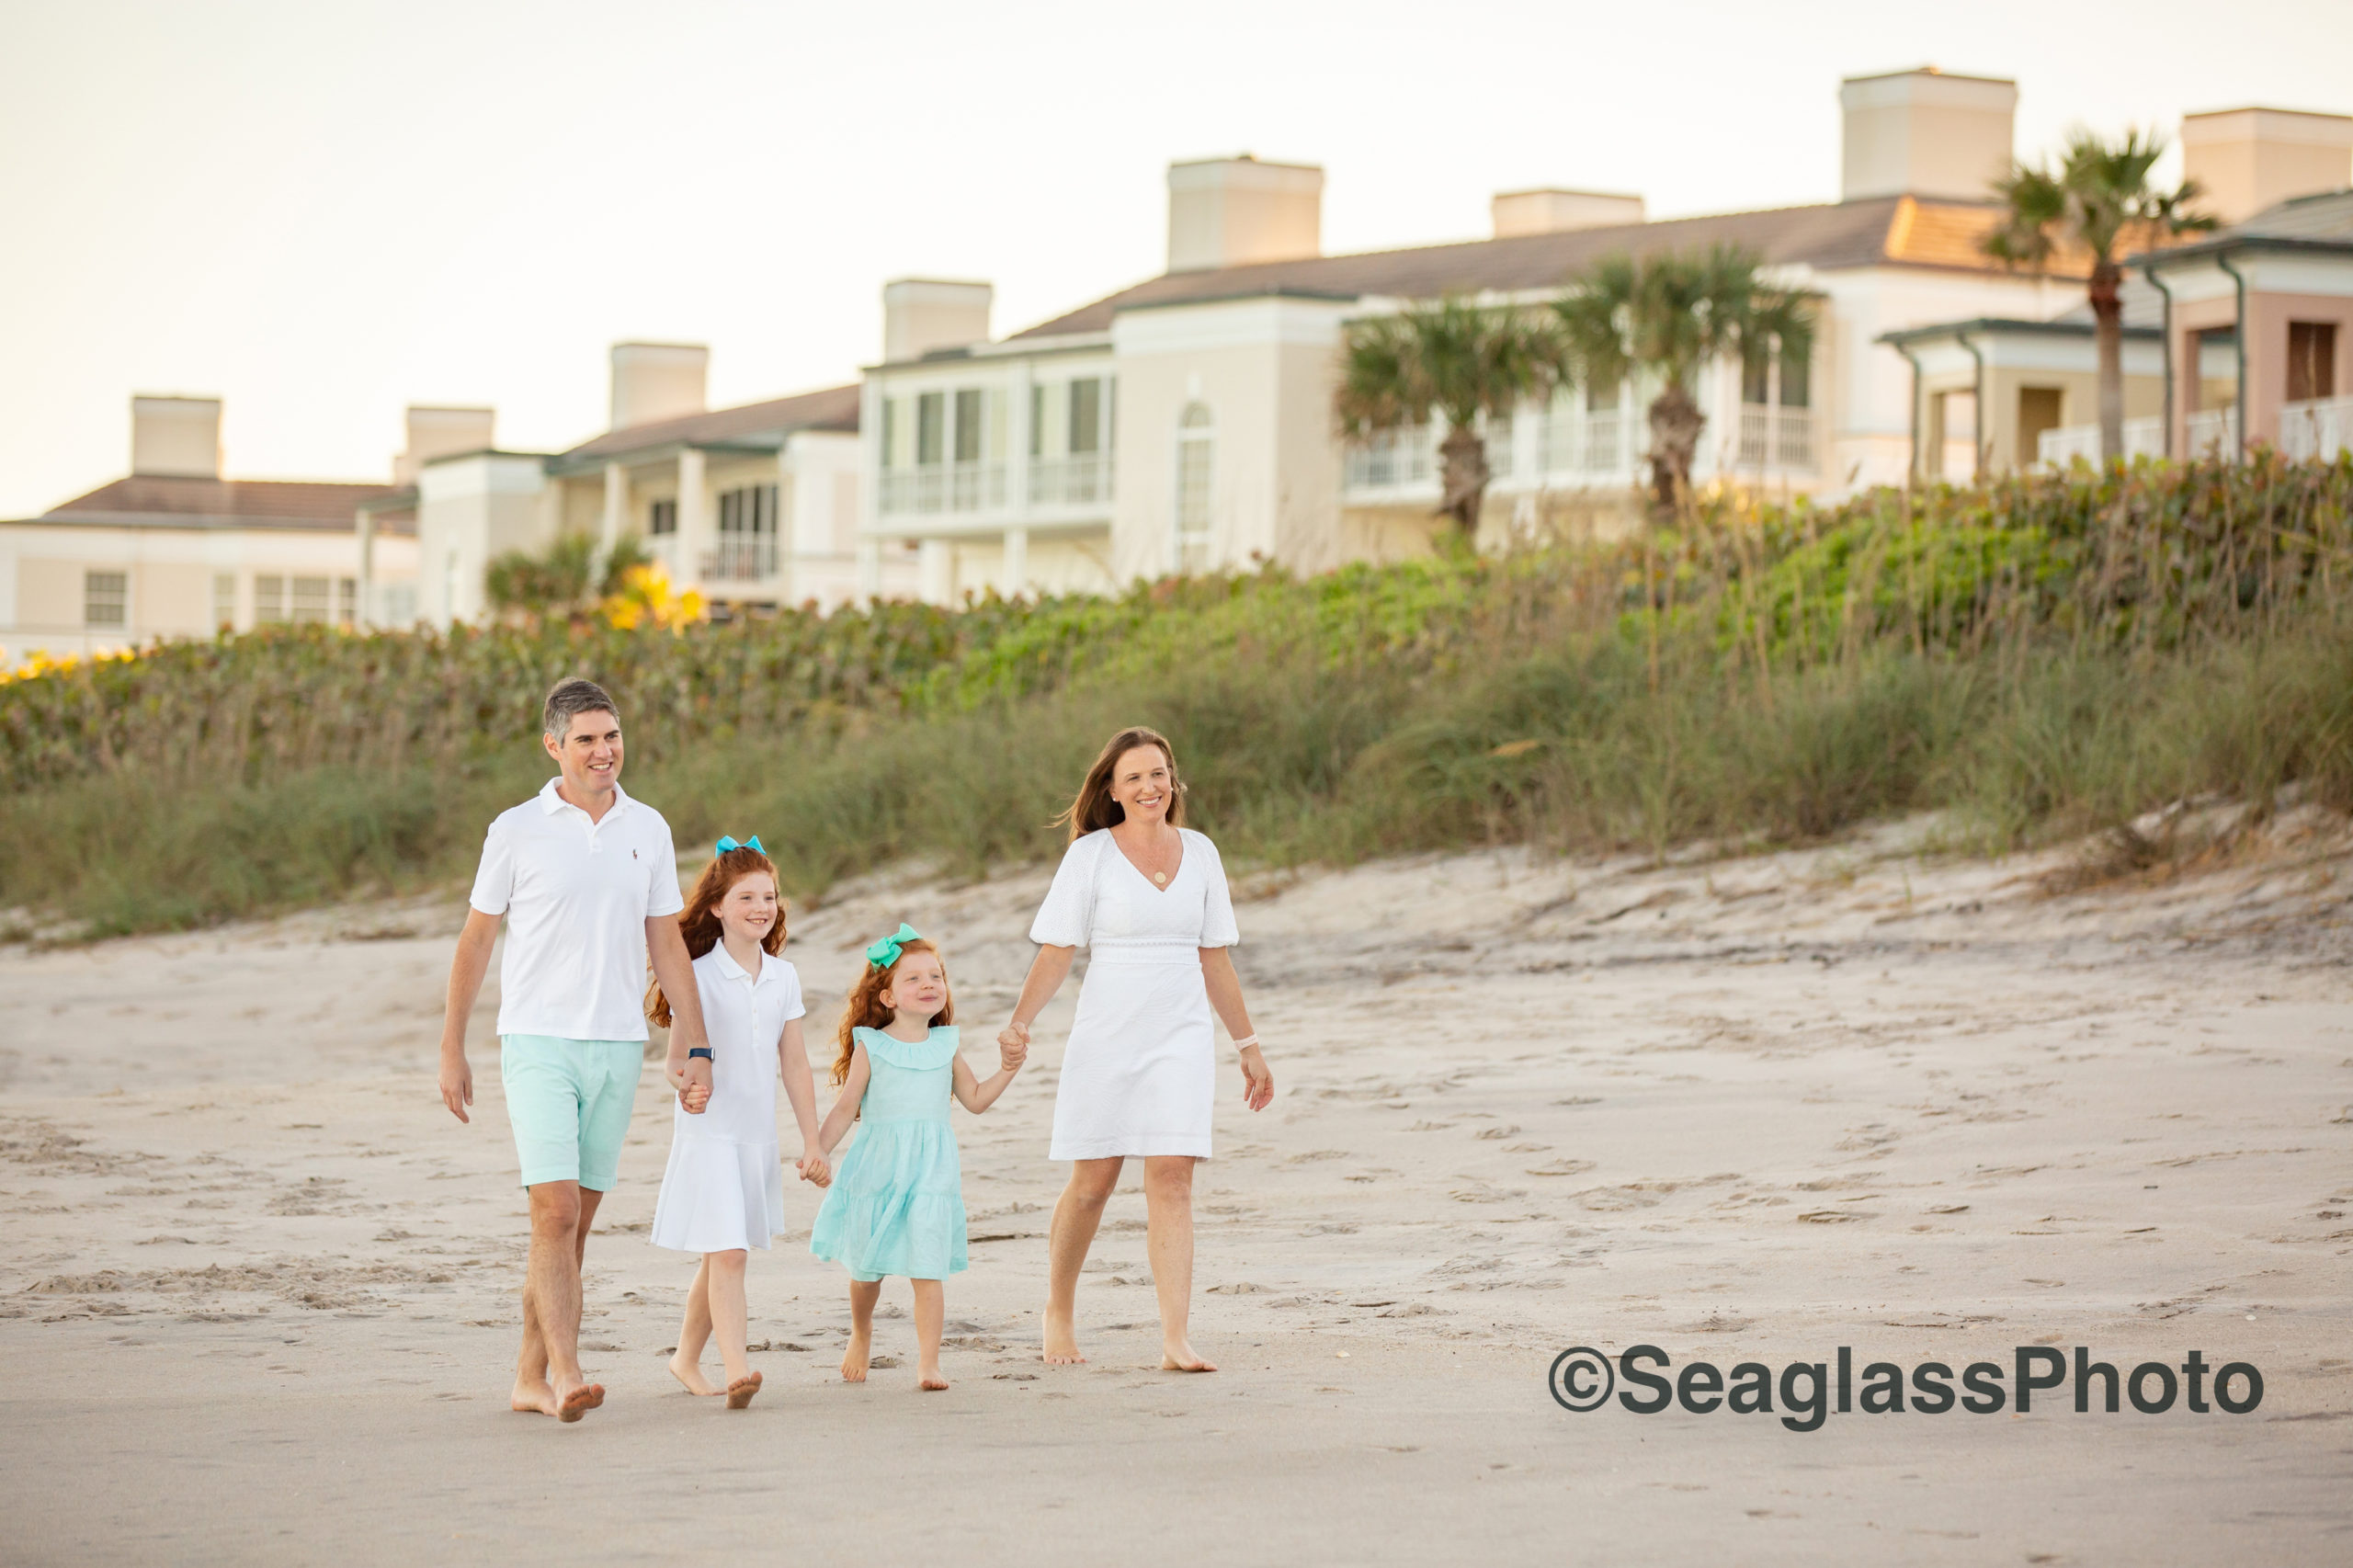 beautiful family walking on the beach in front of the John's Island Condos in Vero Beach Florida. The family is wearing white and aqua